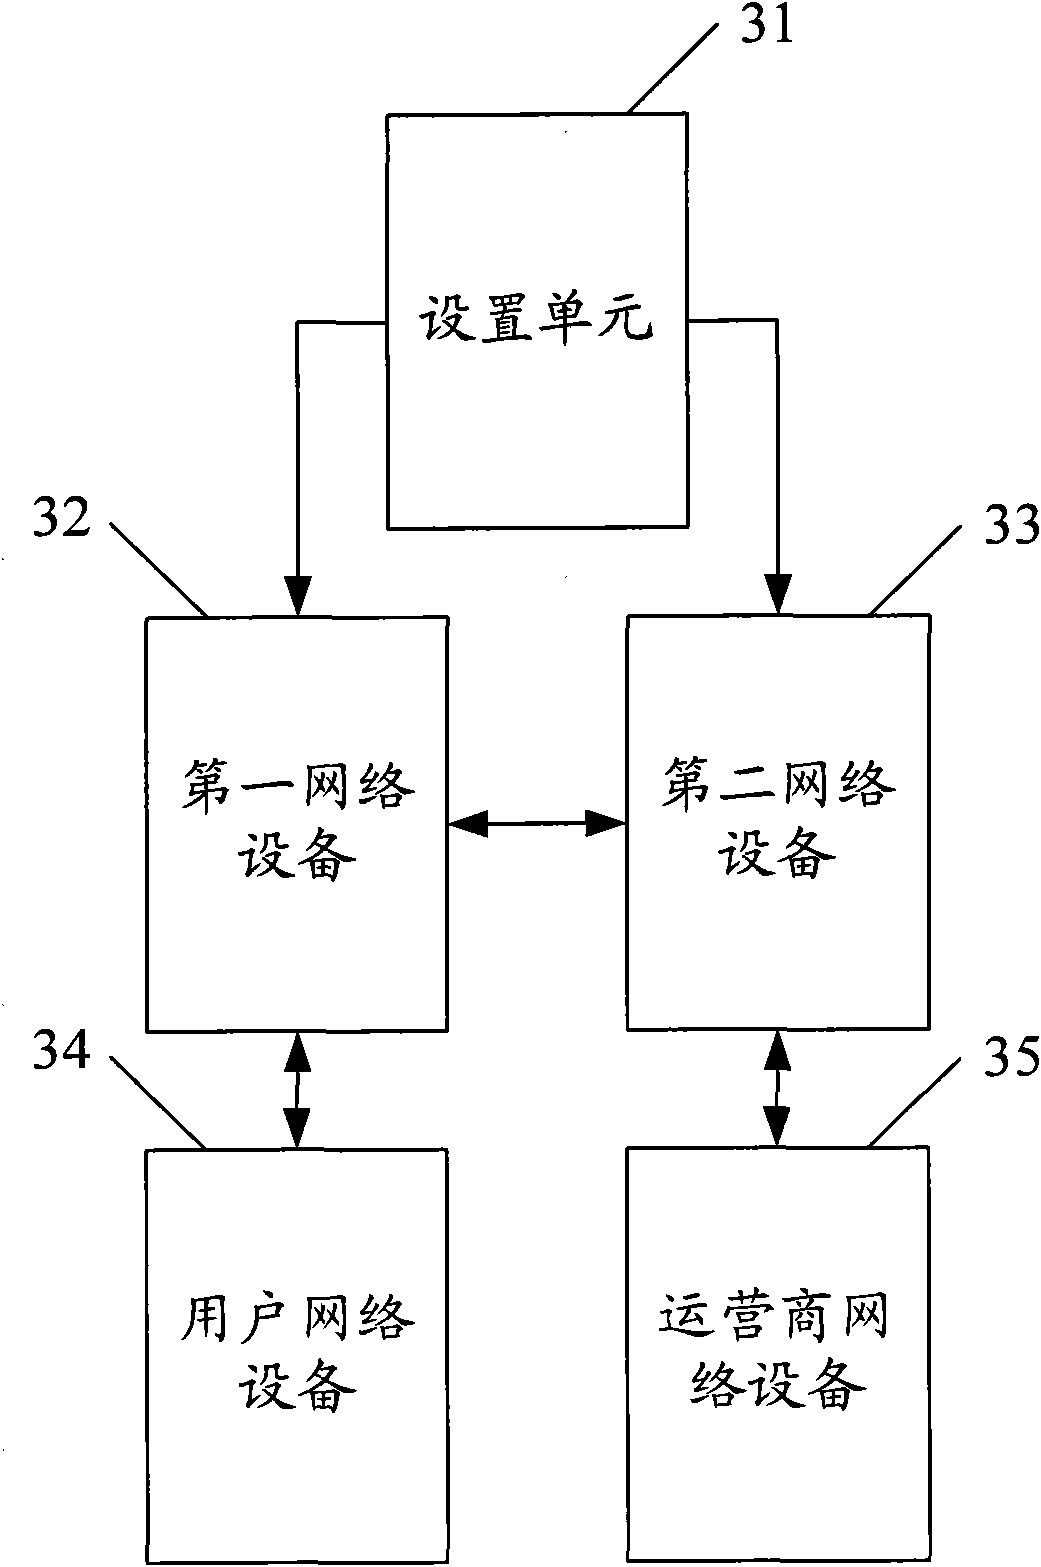 Method for communicating packet transport network (PTN) with double-layer Ethernet and system thereof